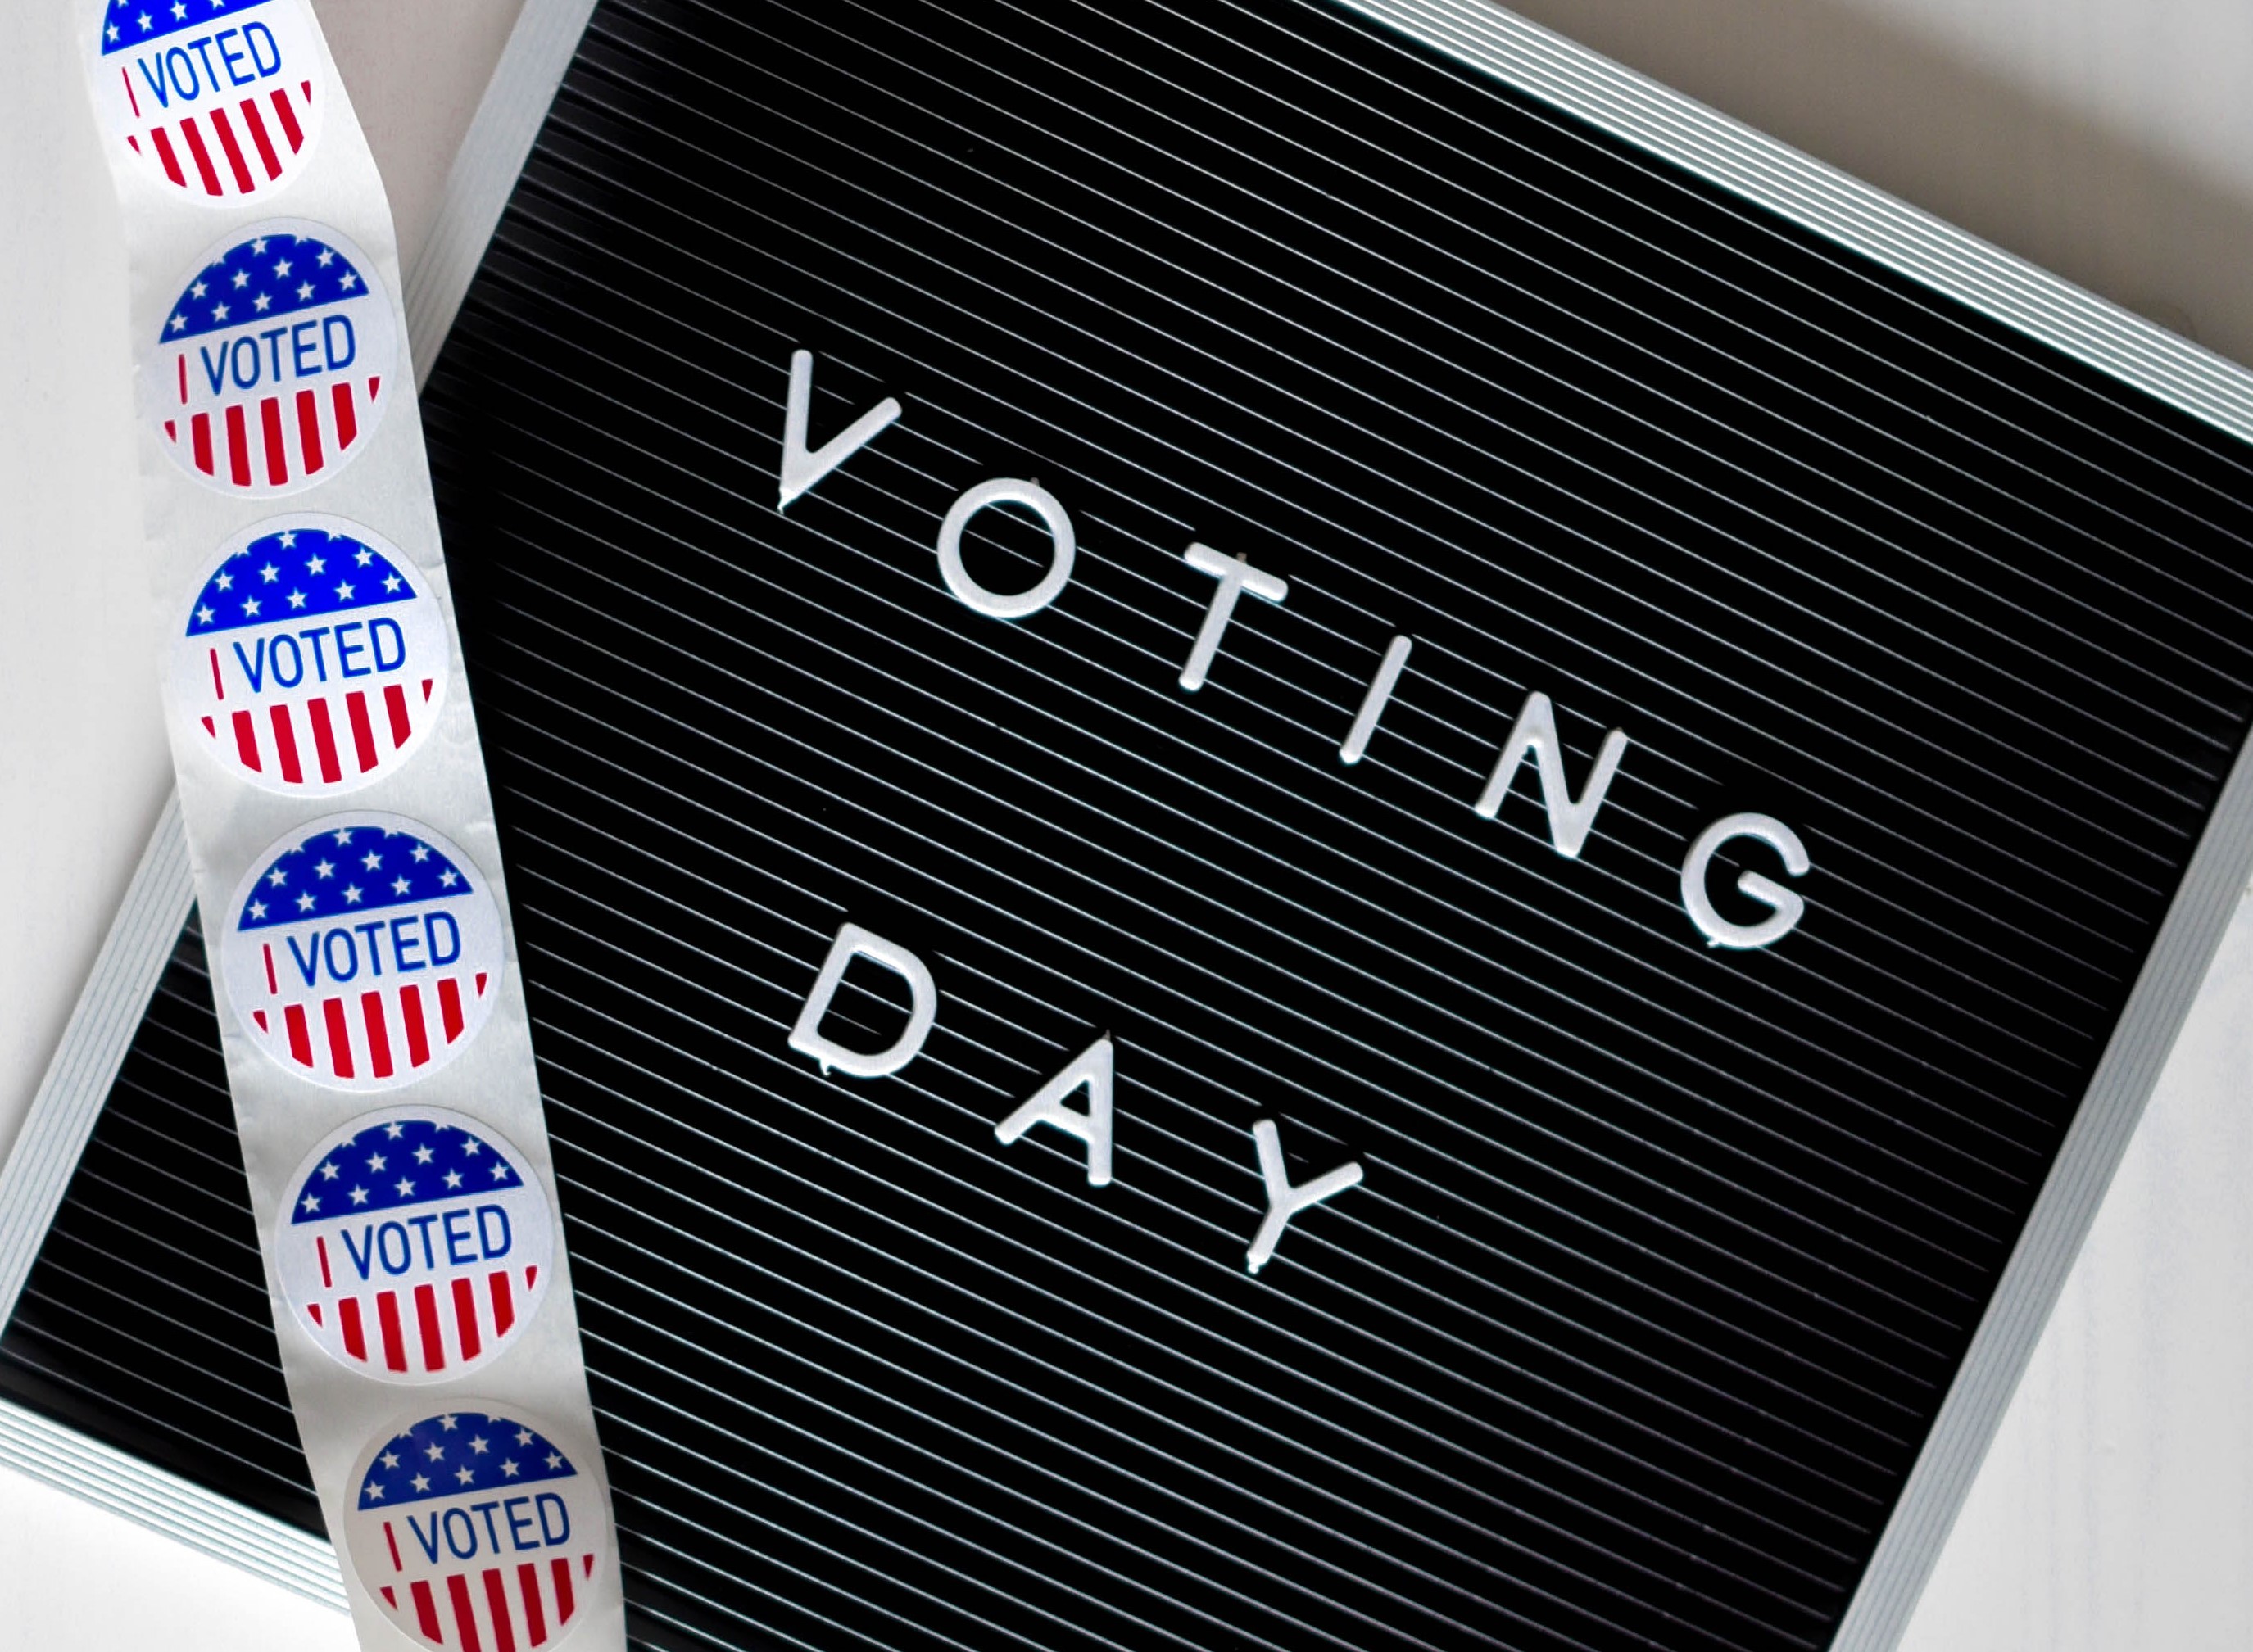 Voting Day letterboard with strip of "I VOTED" stickers draped over letterboard